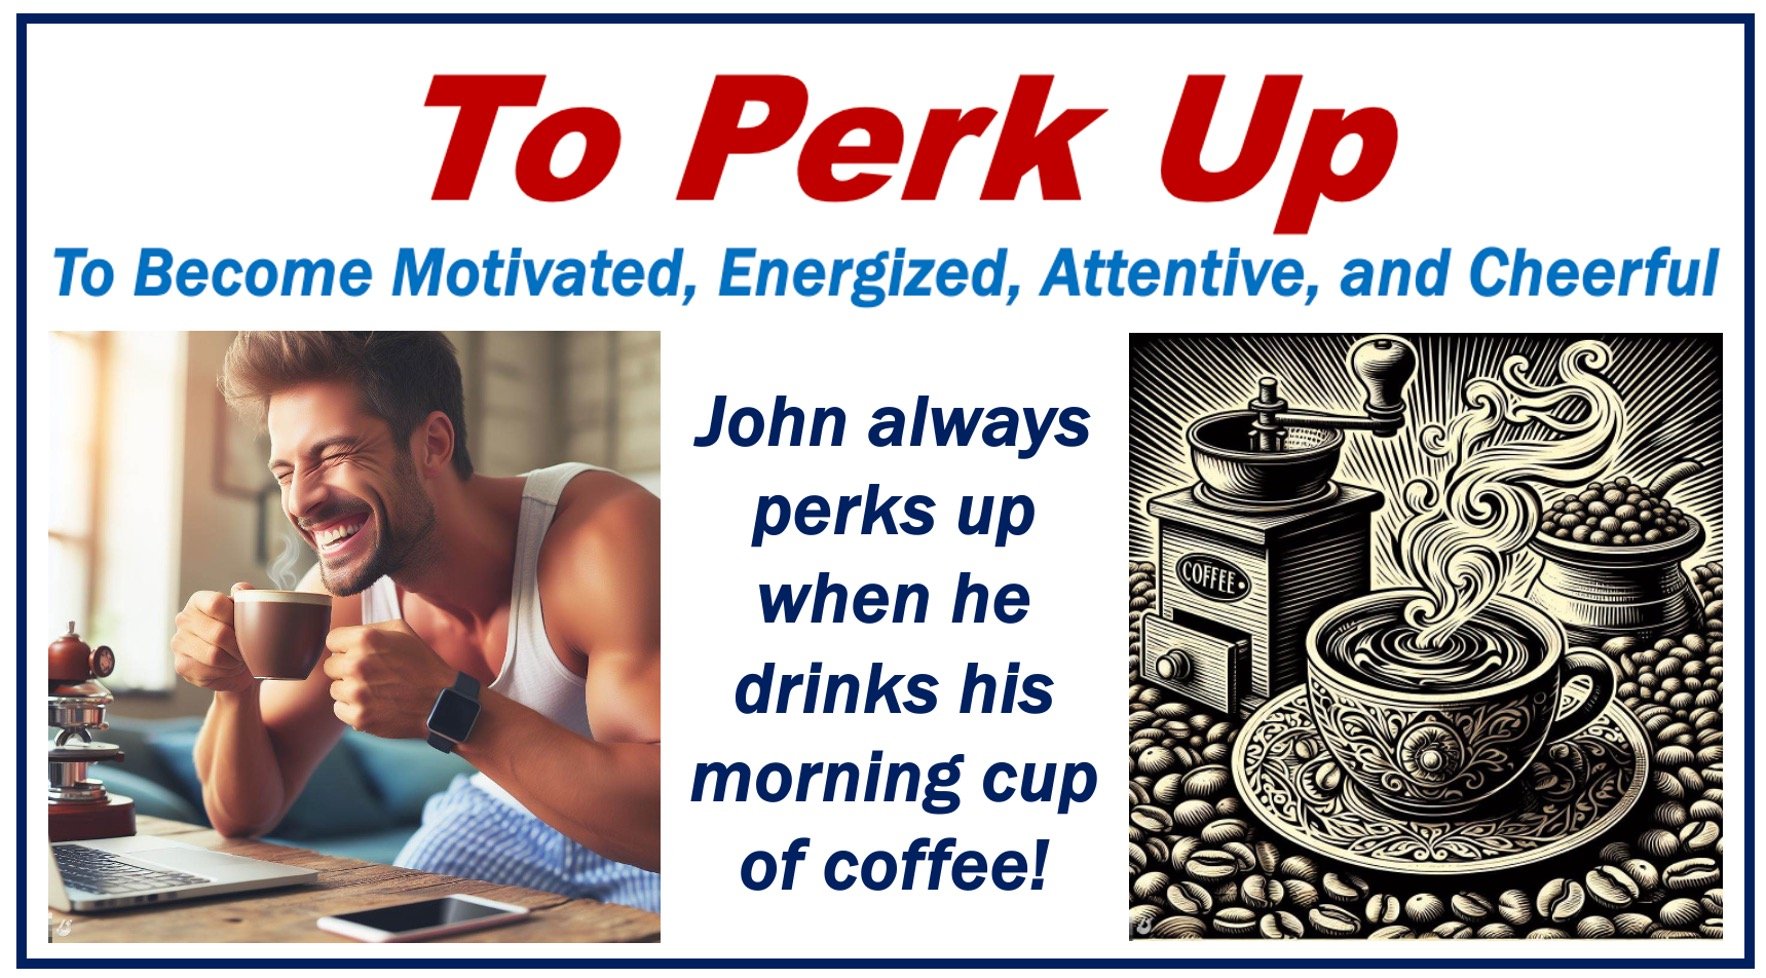 A man drinking a cup of coffee and feeling it perk him up.